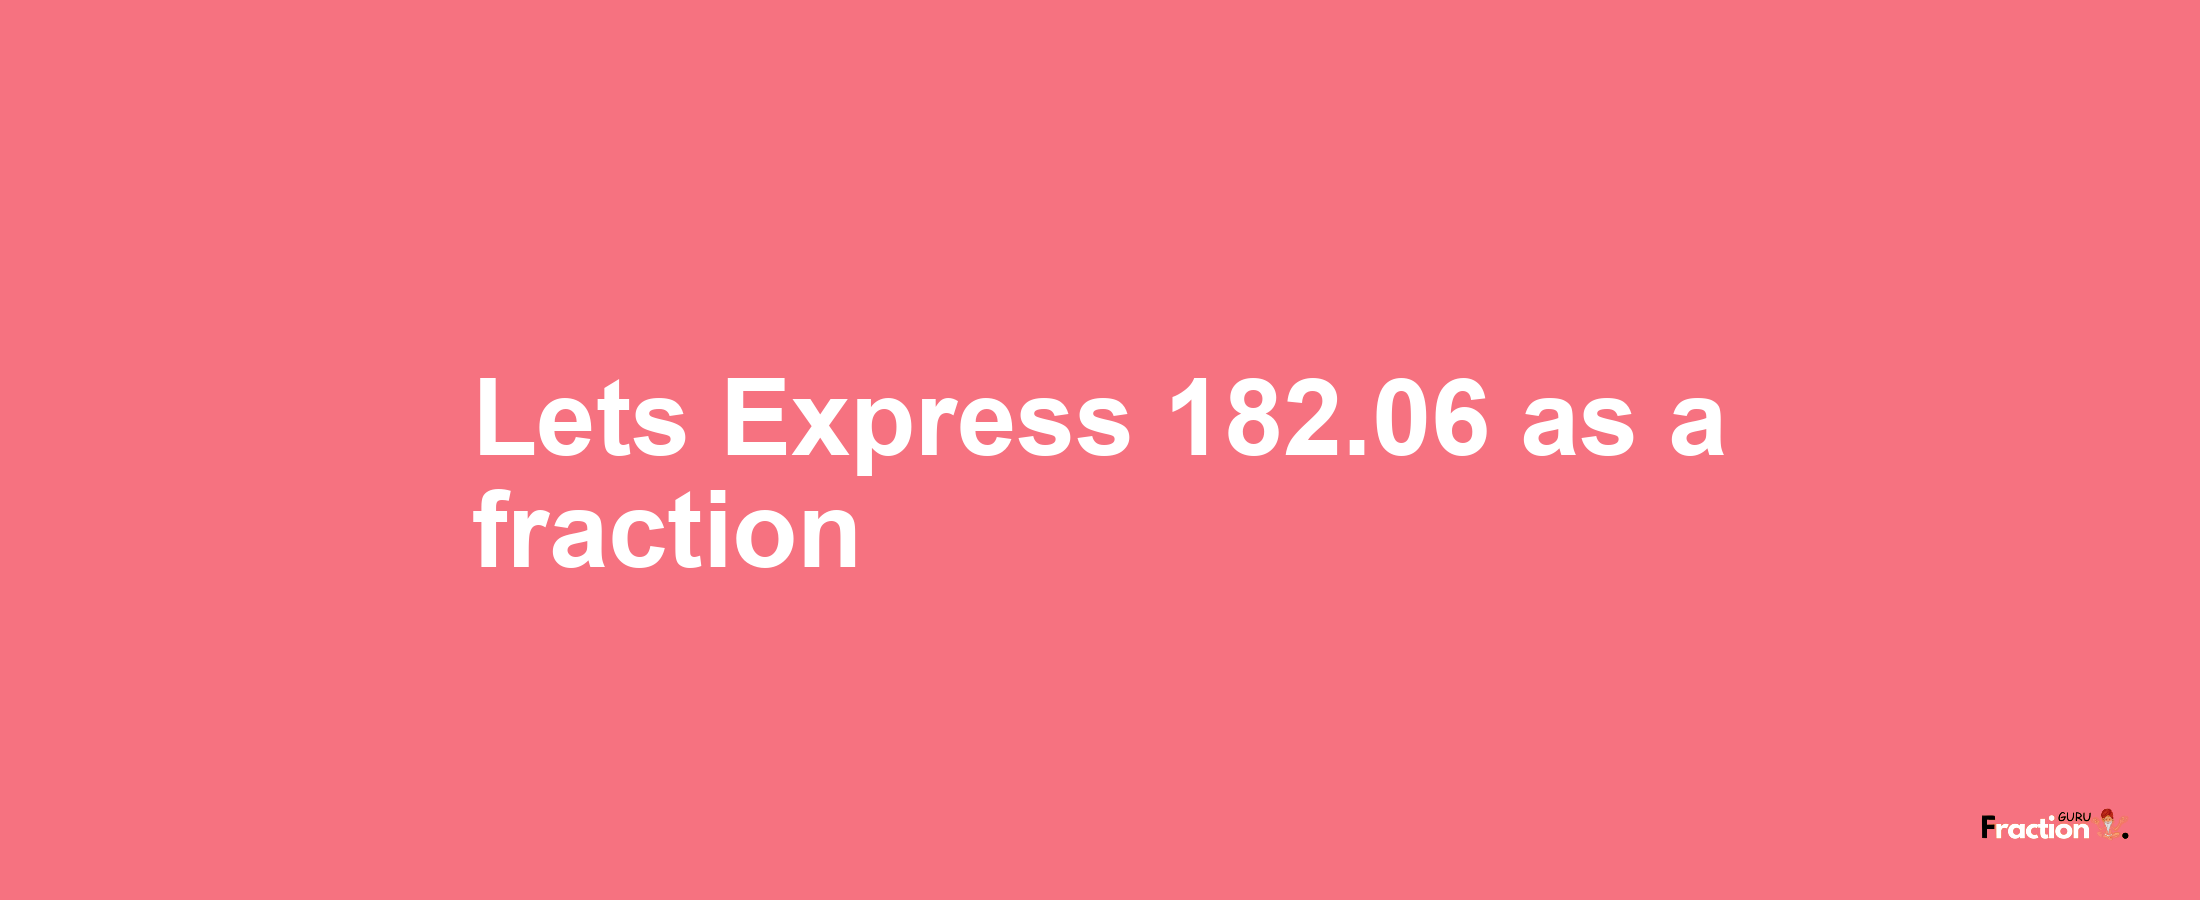 Lets Express 182.06 as afraction